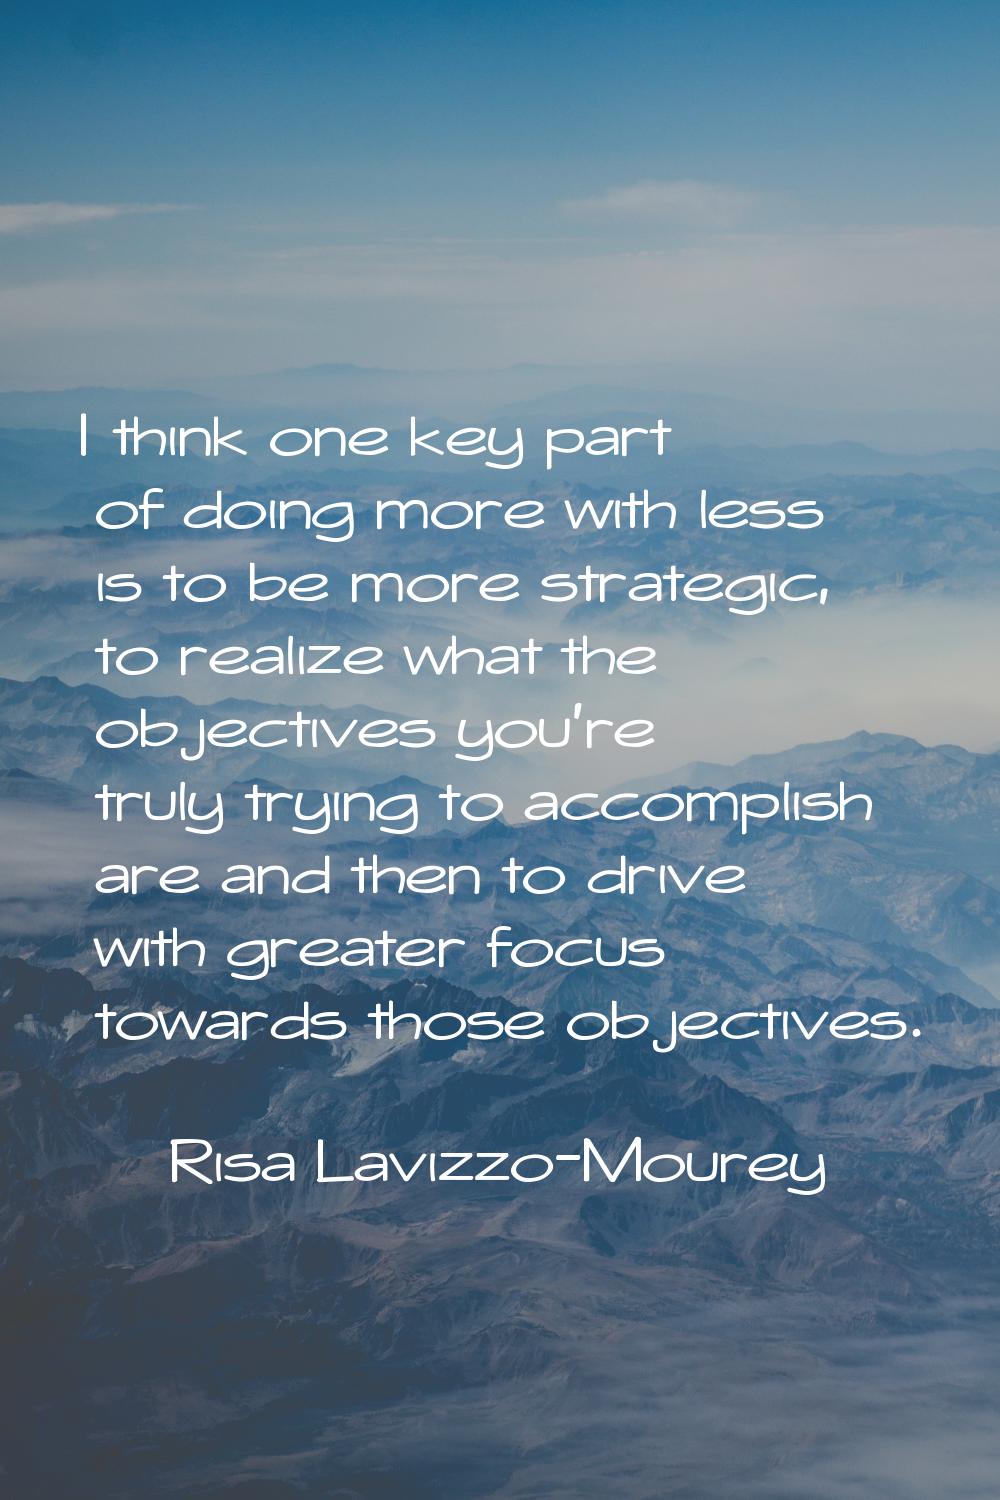 I think one key part of doing more with less is to be more strategic, to realize what the objective